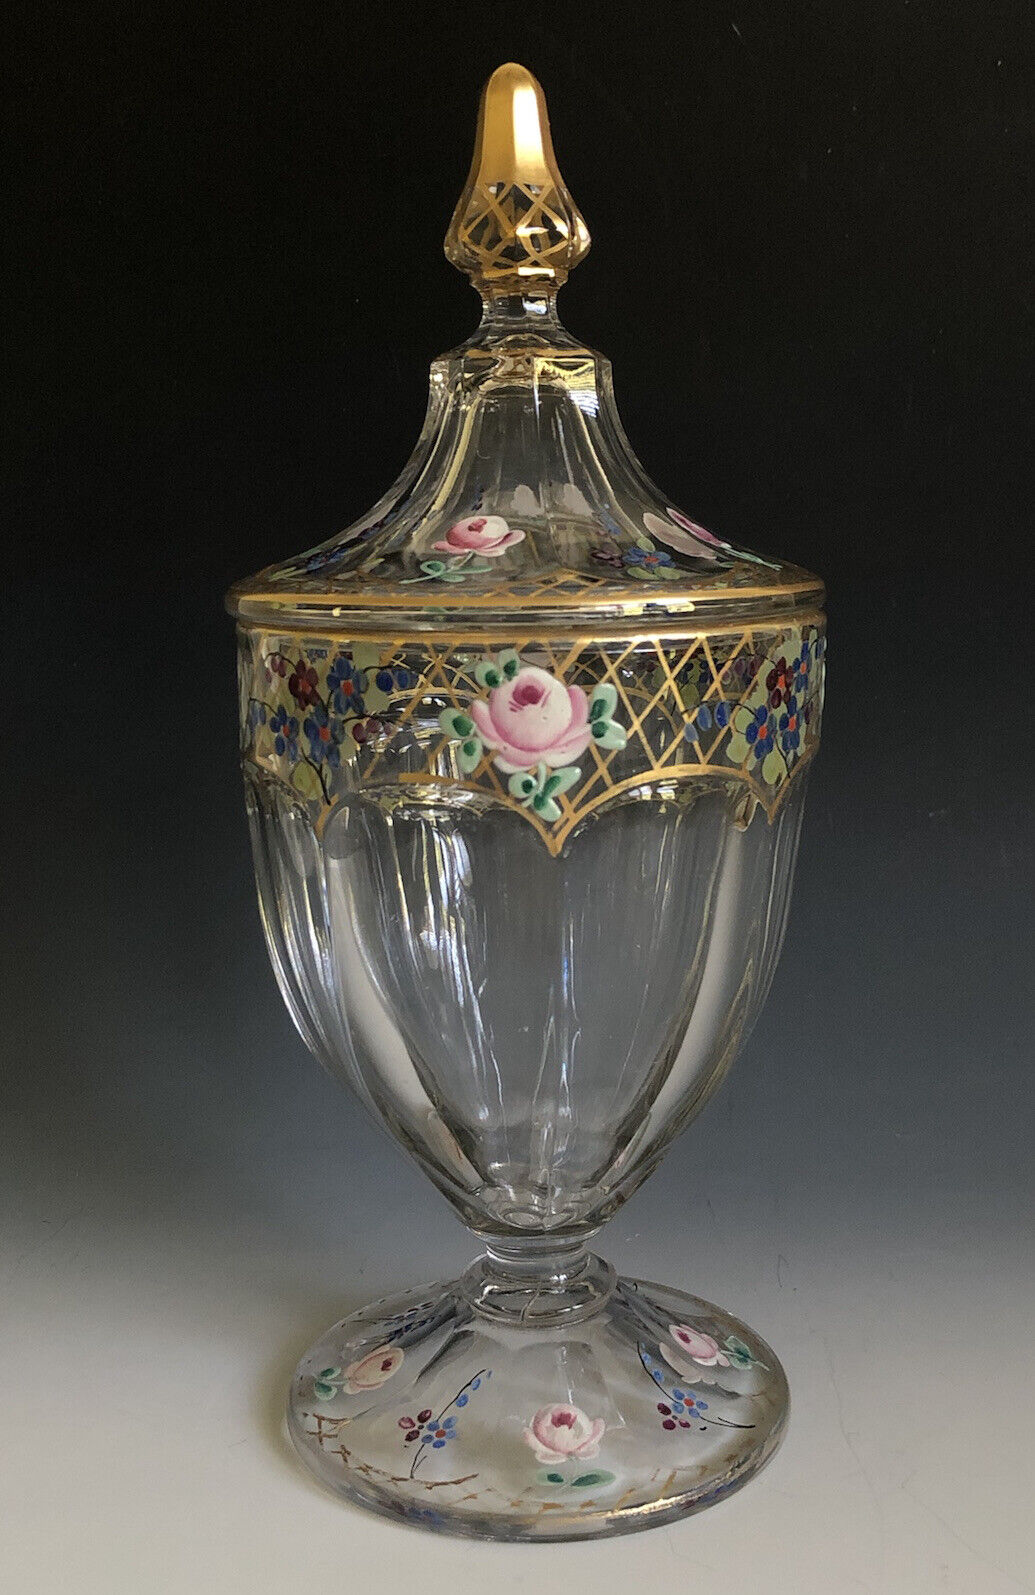 Antique Westmoreland Hand Painted Enameled Floral Apothecary Jar